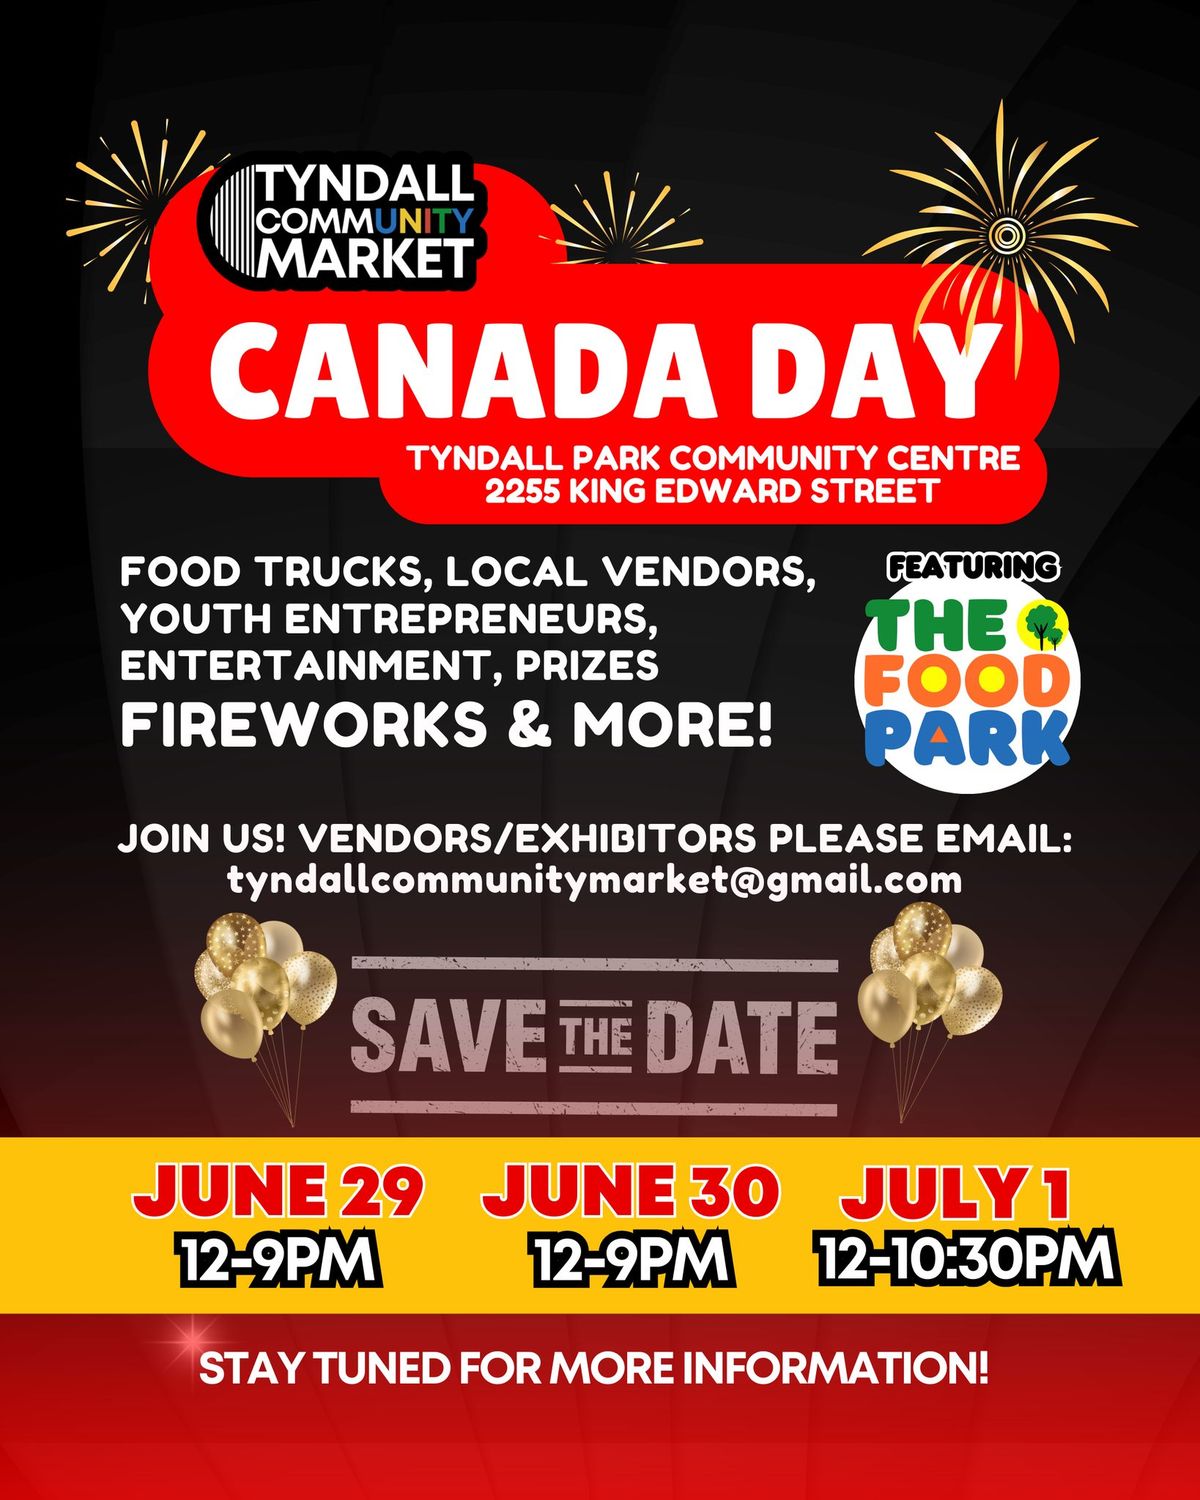 Oh Canada Weekend at Tyndall Community Market